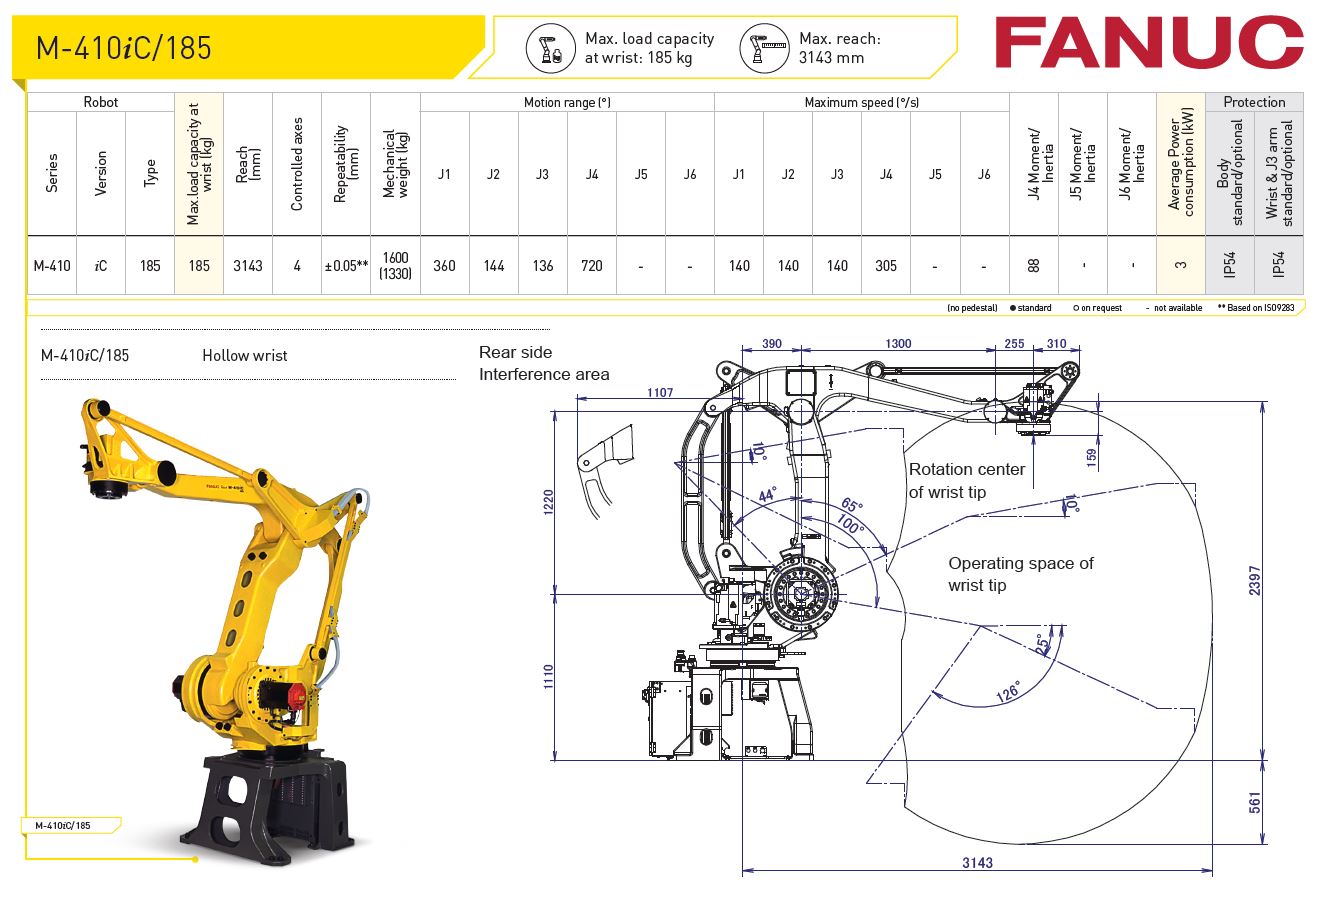 M-410iC-185 Fanuc Robot Specifications - RobotWorld